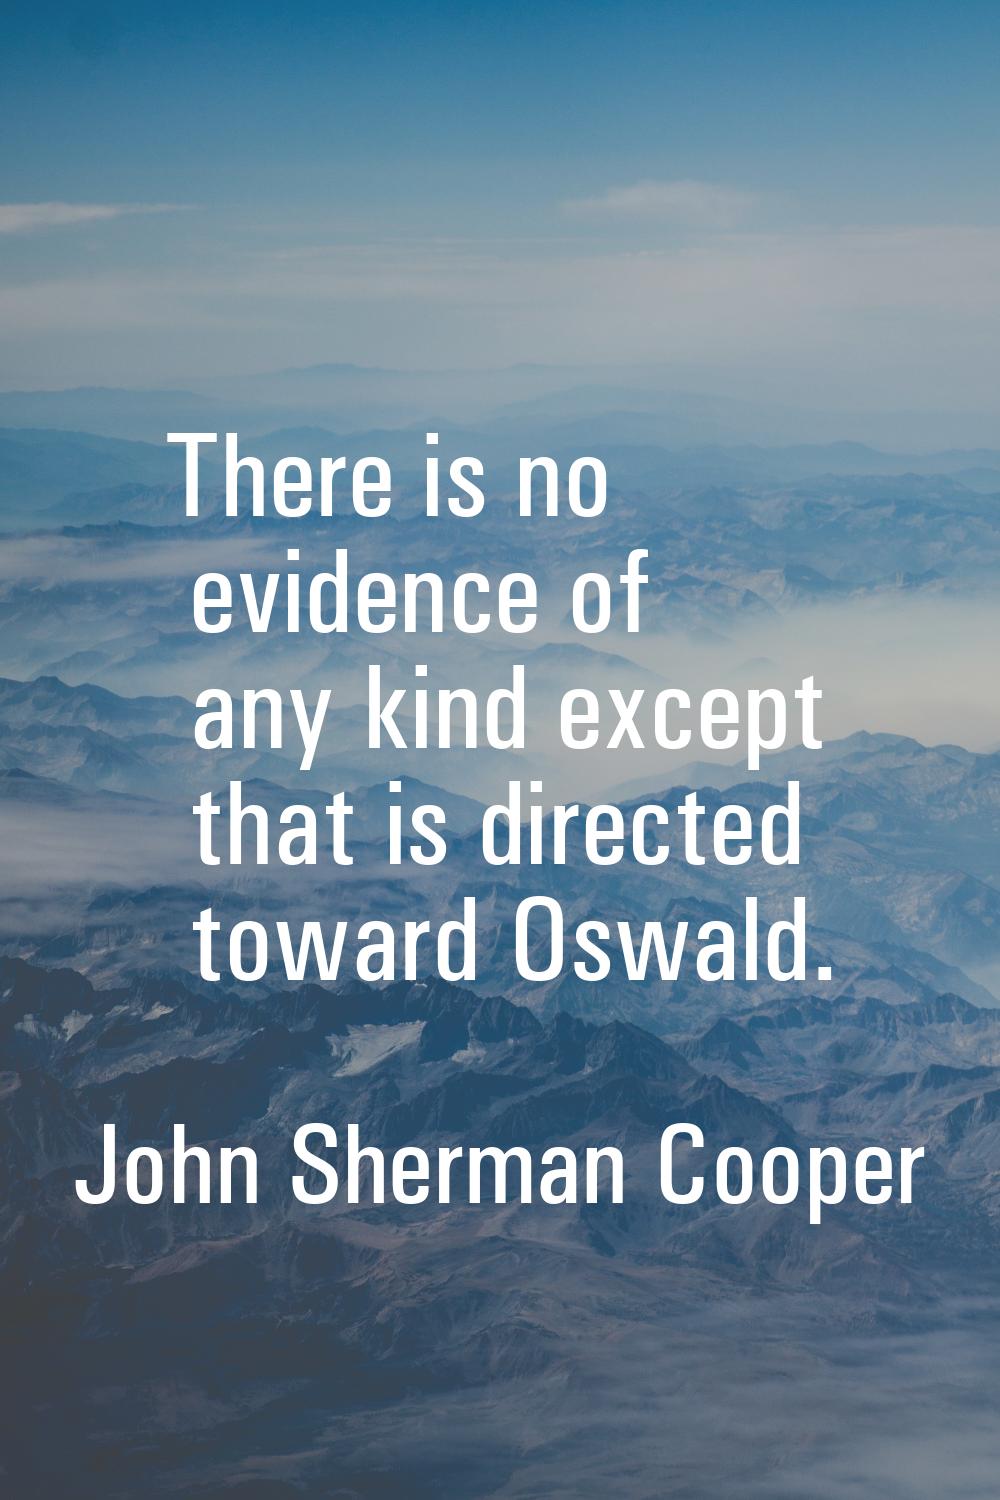 There is no evidence of any kind except that is directed toward Oswald.